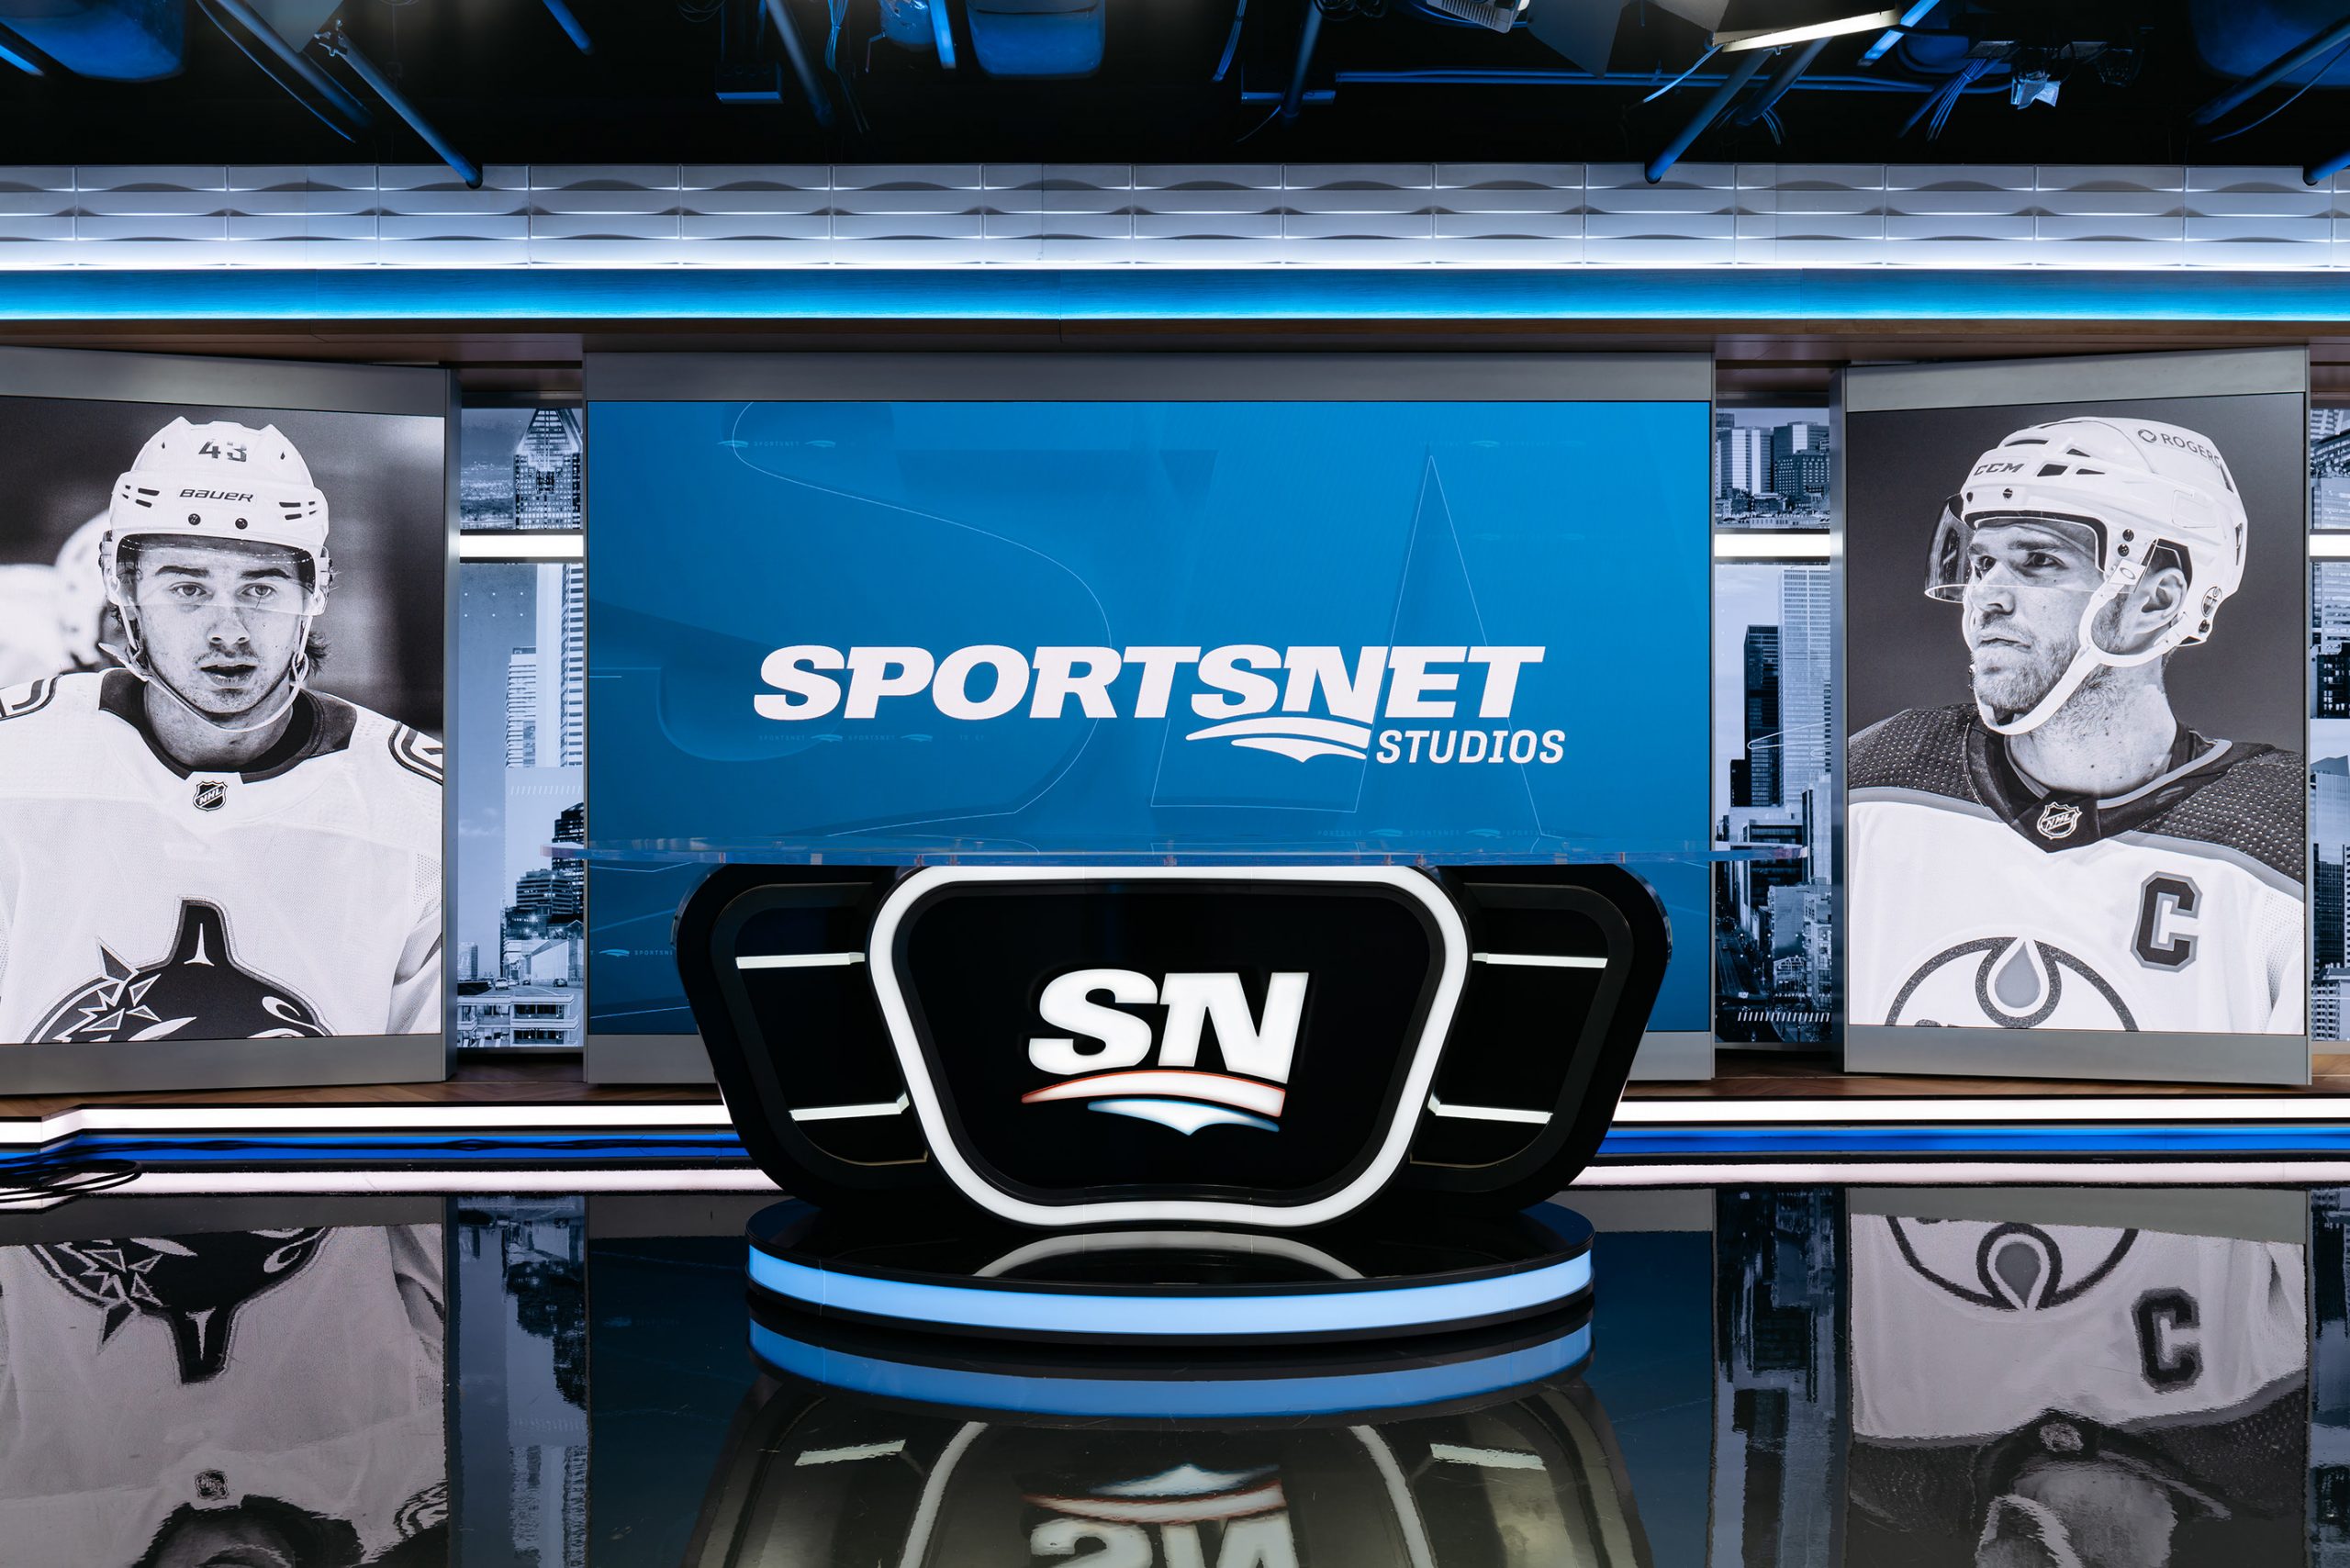 NHL Puck Drop 2021 State of the Art New Sportsnet Studios Facility Officially Unveiled Tonight